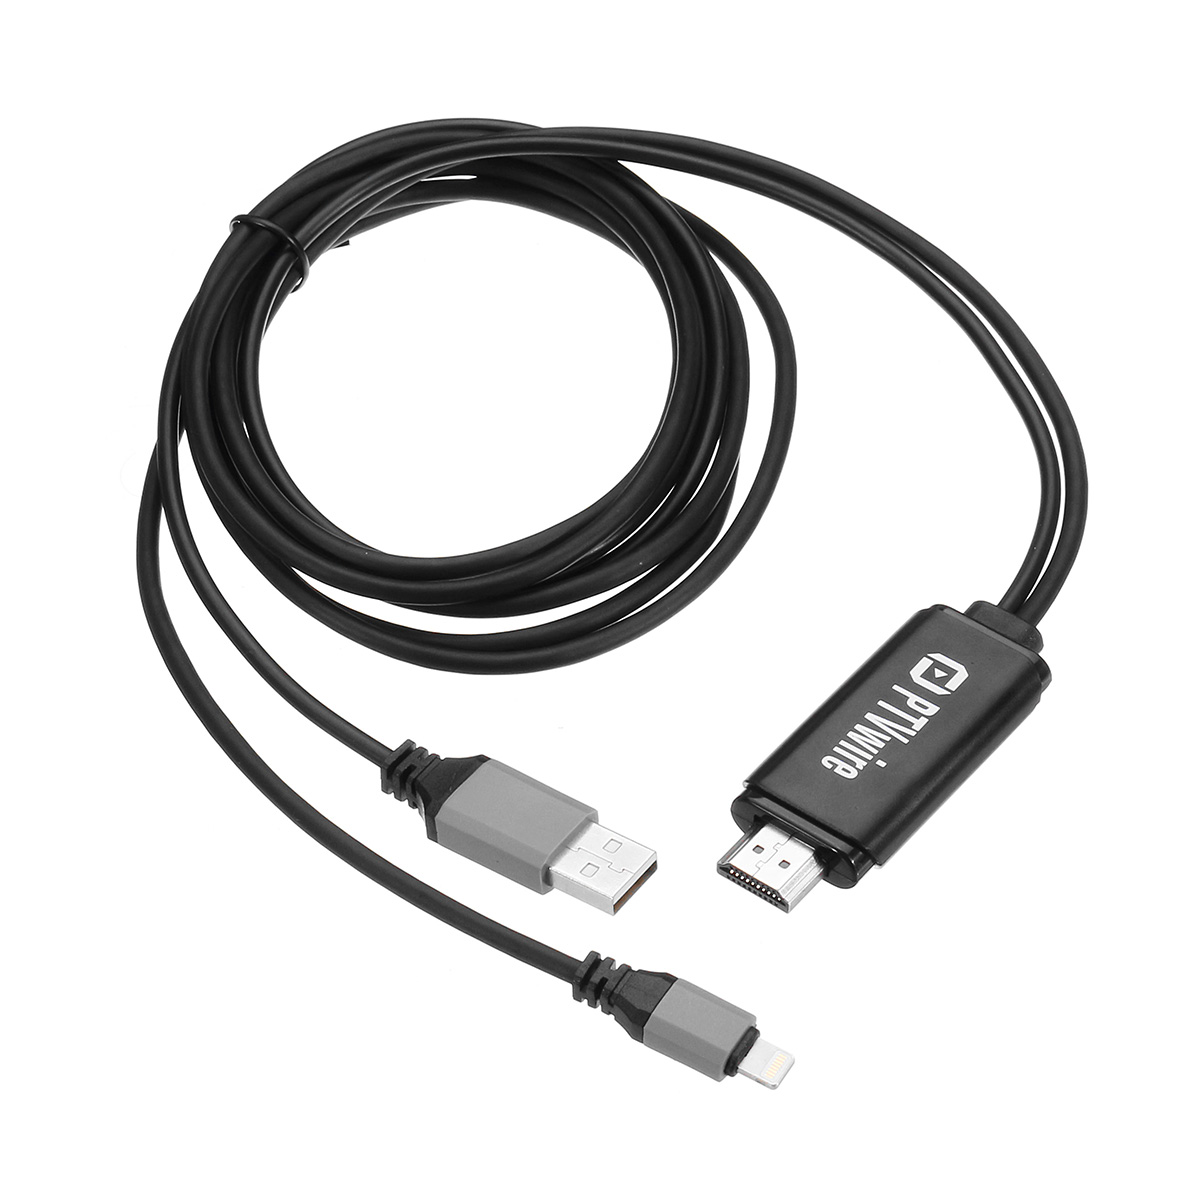 Bakeey-USB-to-HDMI-Adapter-Cable-Support-8-Channels-Digital-Audio-Support-AirplayMirroring-2M-Long-1940268-12